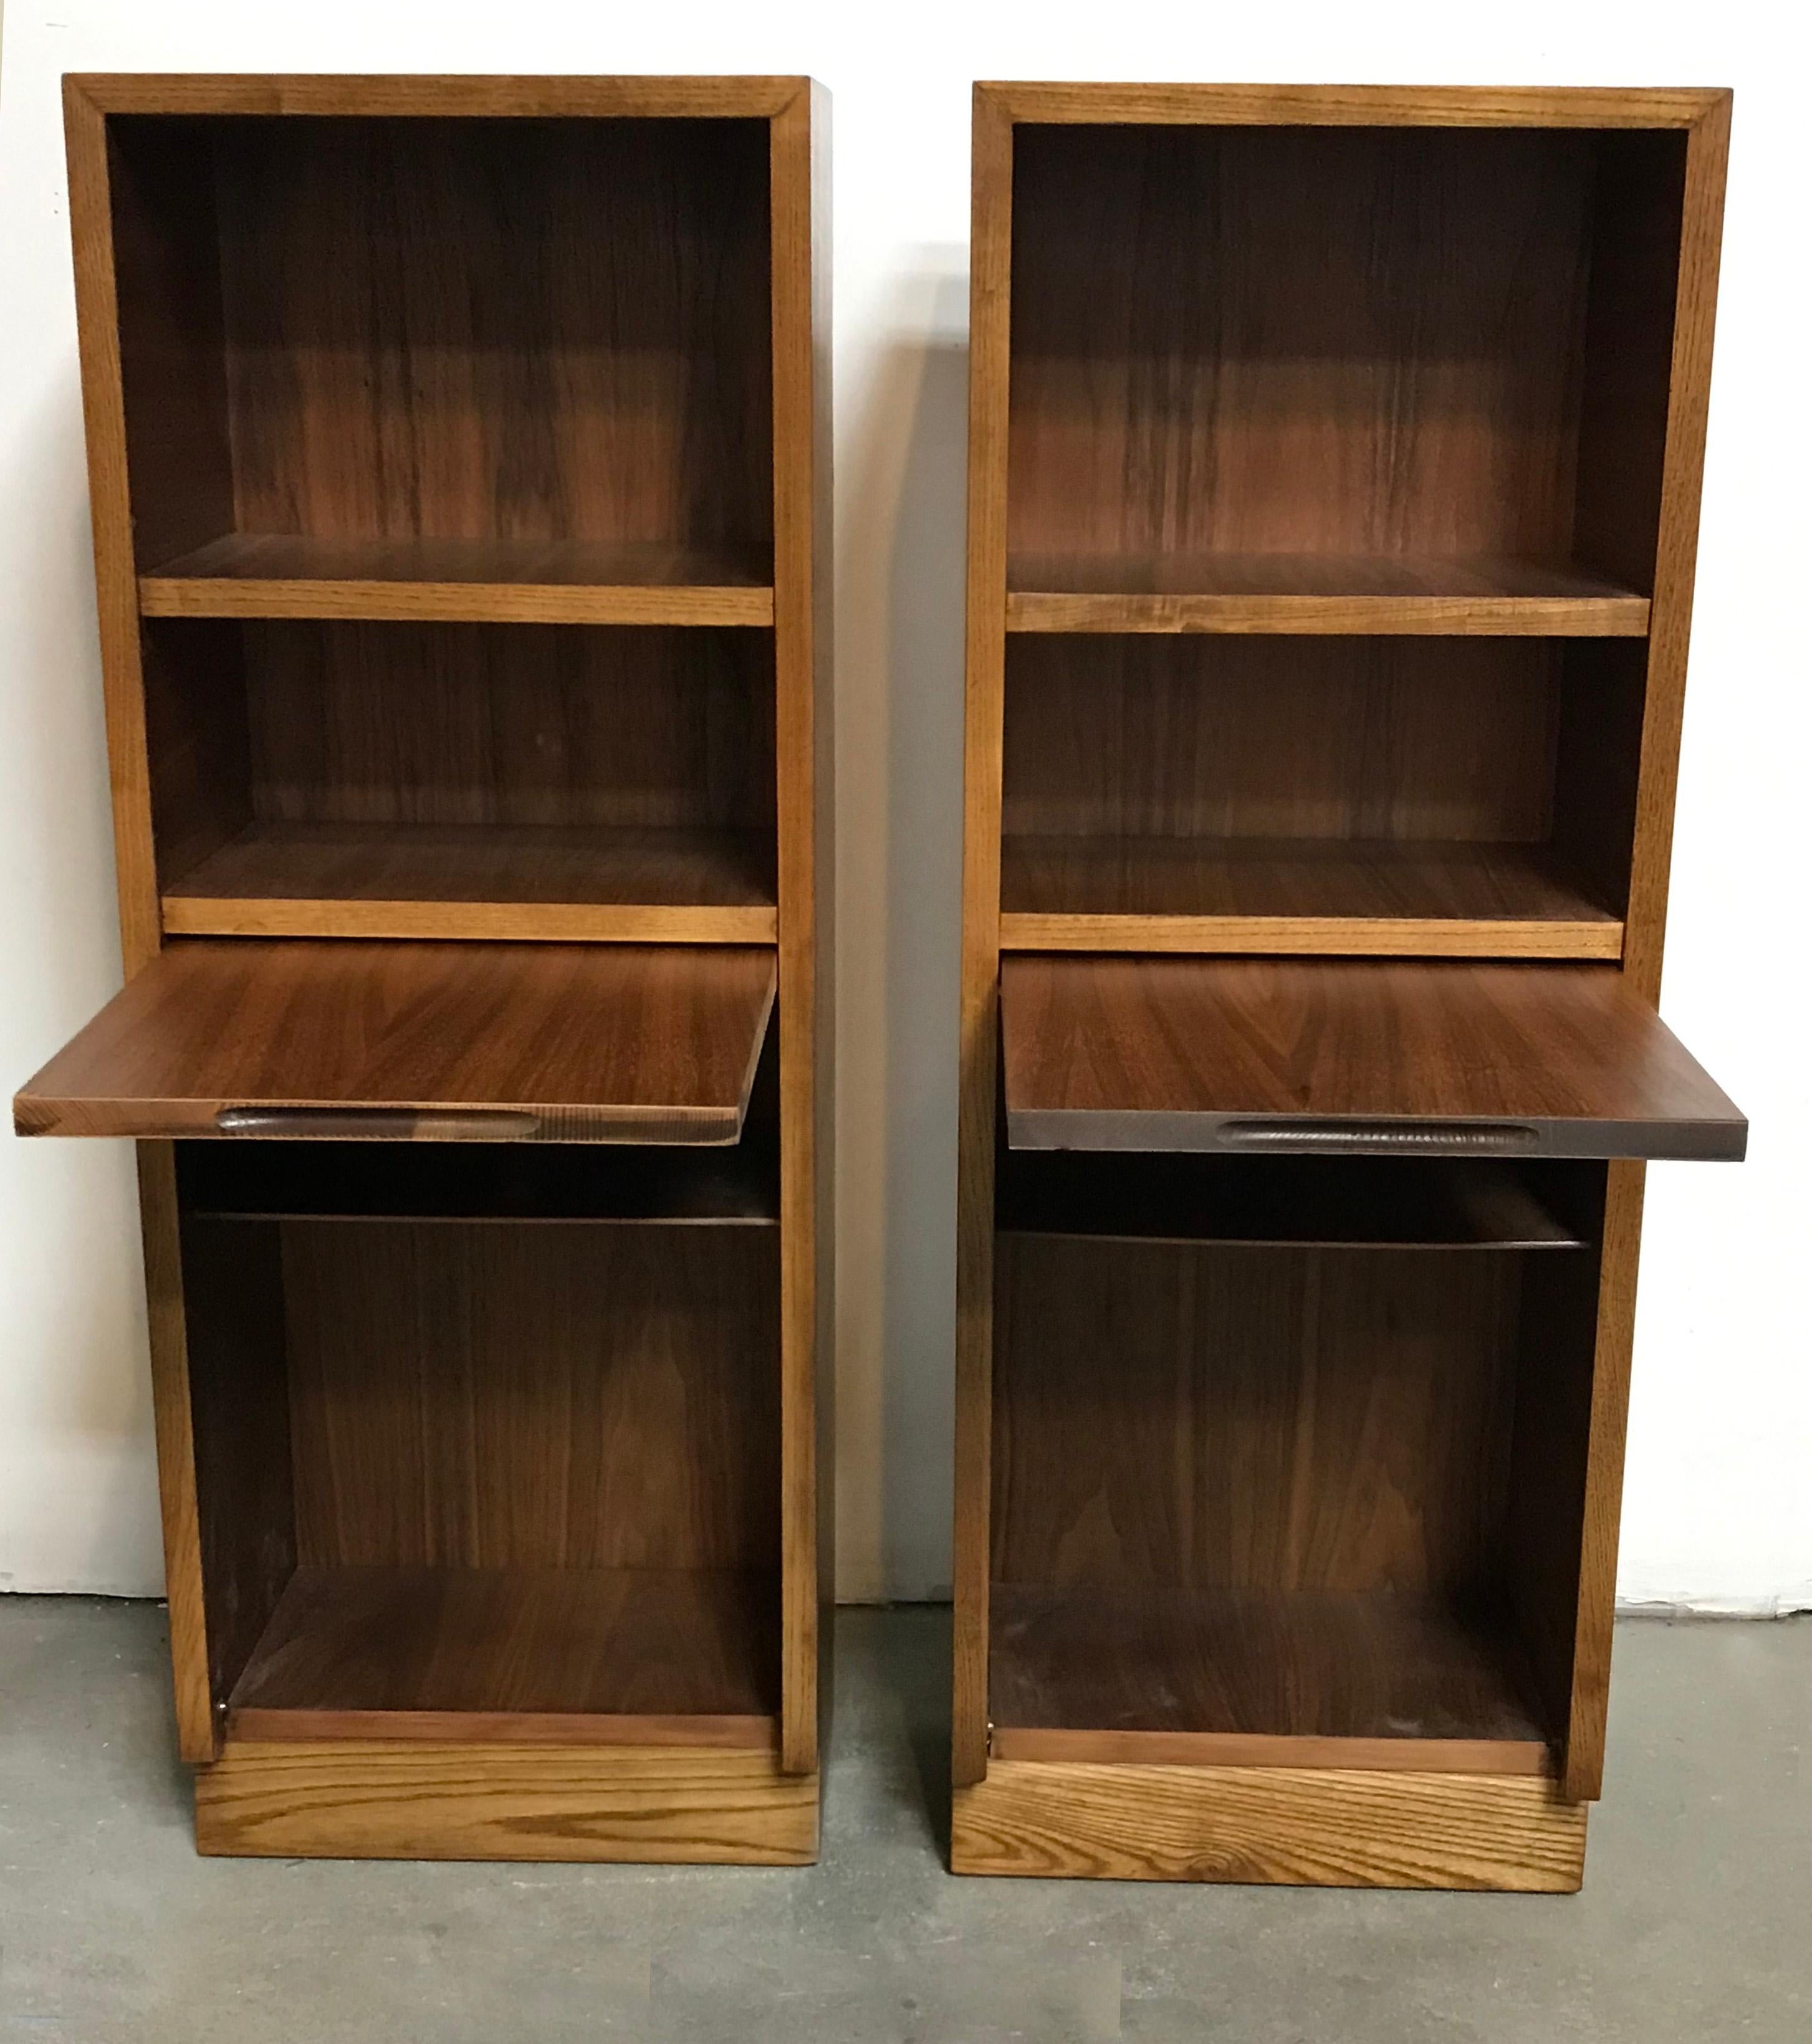 A pair of tables with a quirky configuration in the form of two, open shelves and two, bottom shelves hidden behind a pull-up board. Can be used as nightstands or pedestals too.